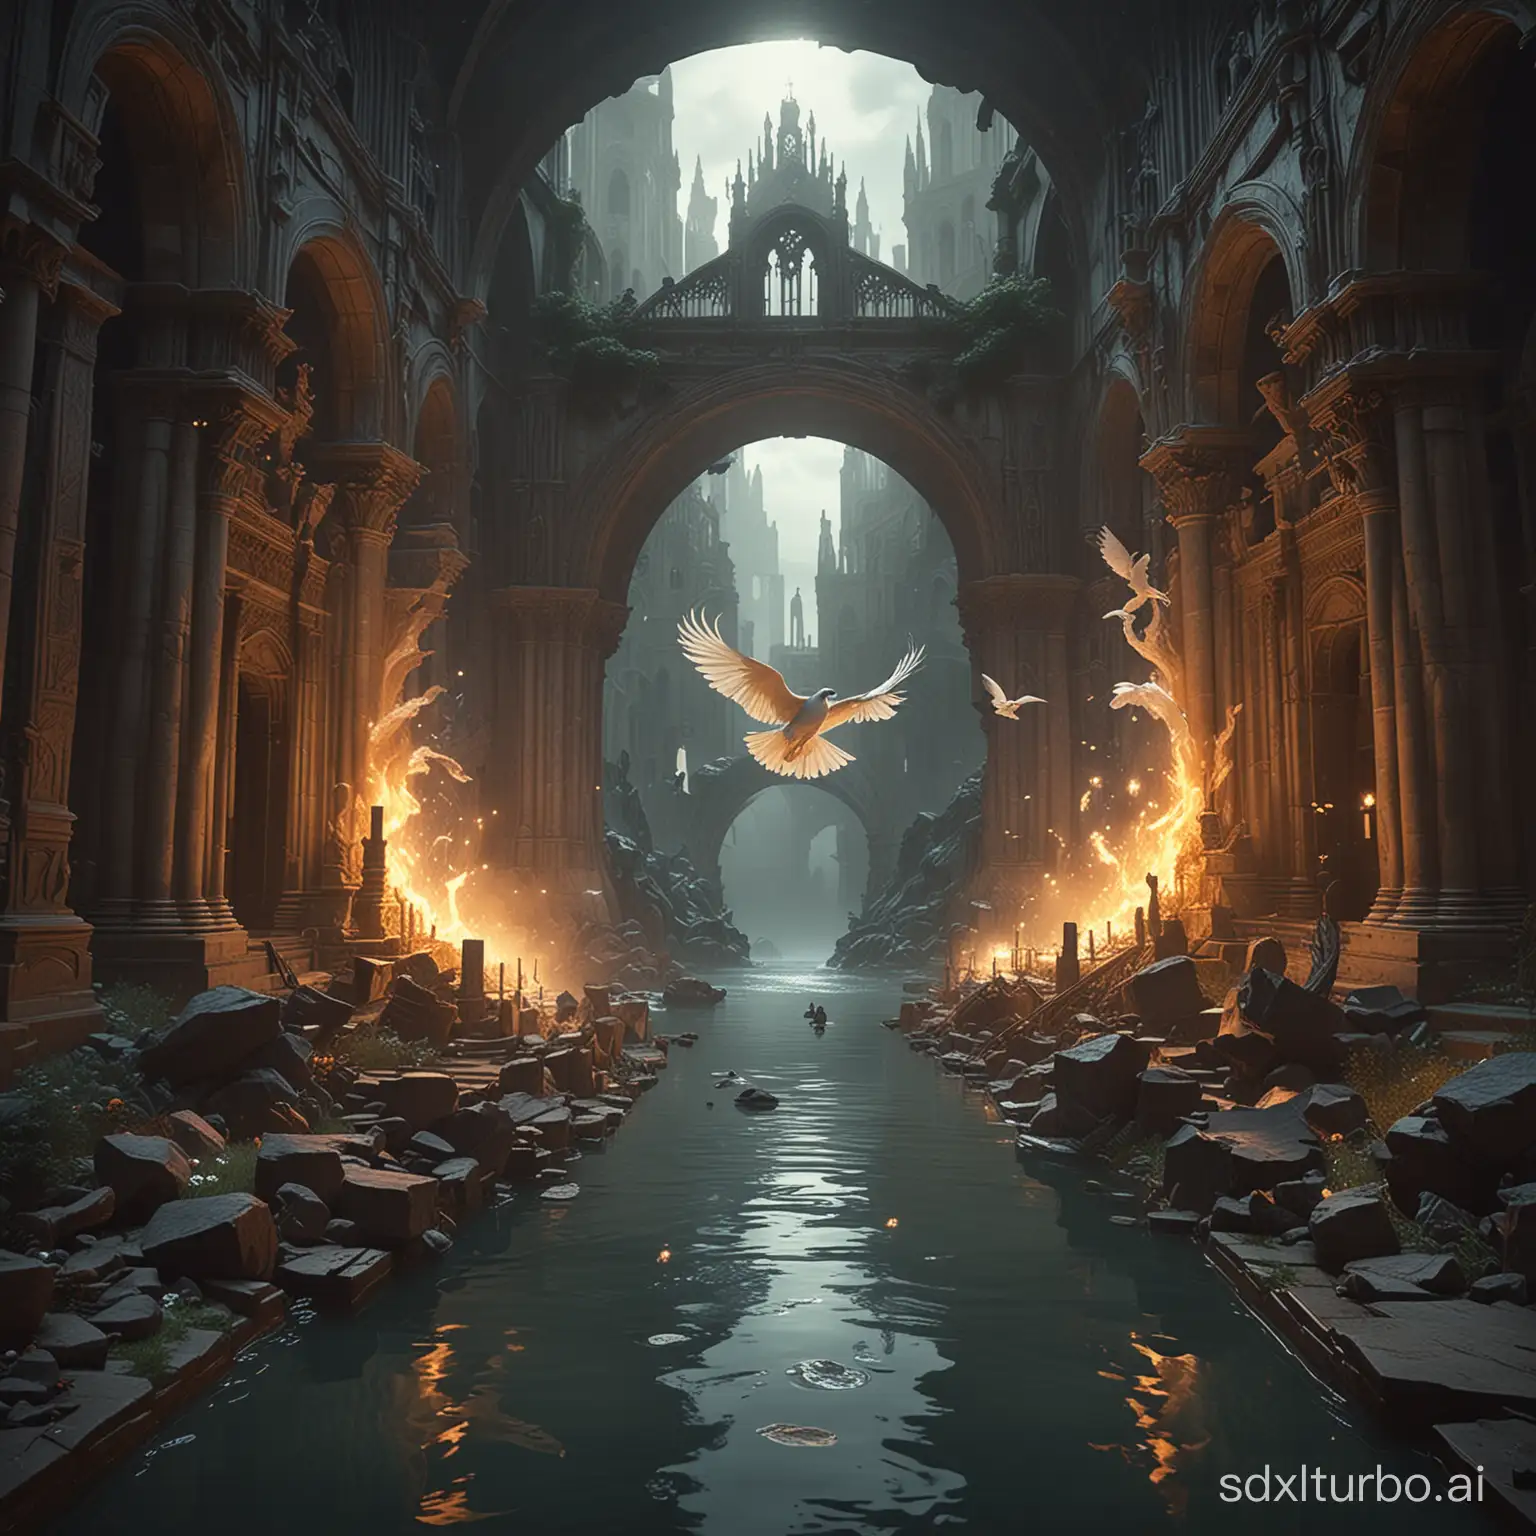 Ethereal-White-Death-Rite-Bird-Soars-Over-Styx-River-Amidst-Roman-Relics-and-Gothic-Cathedrals